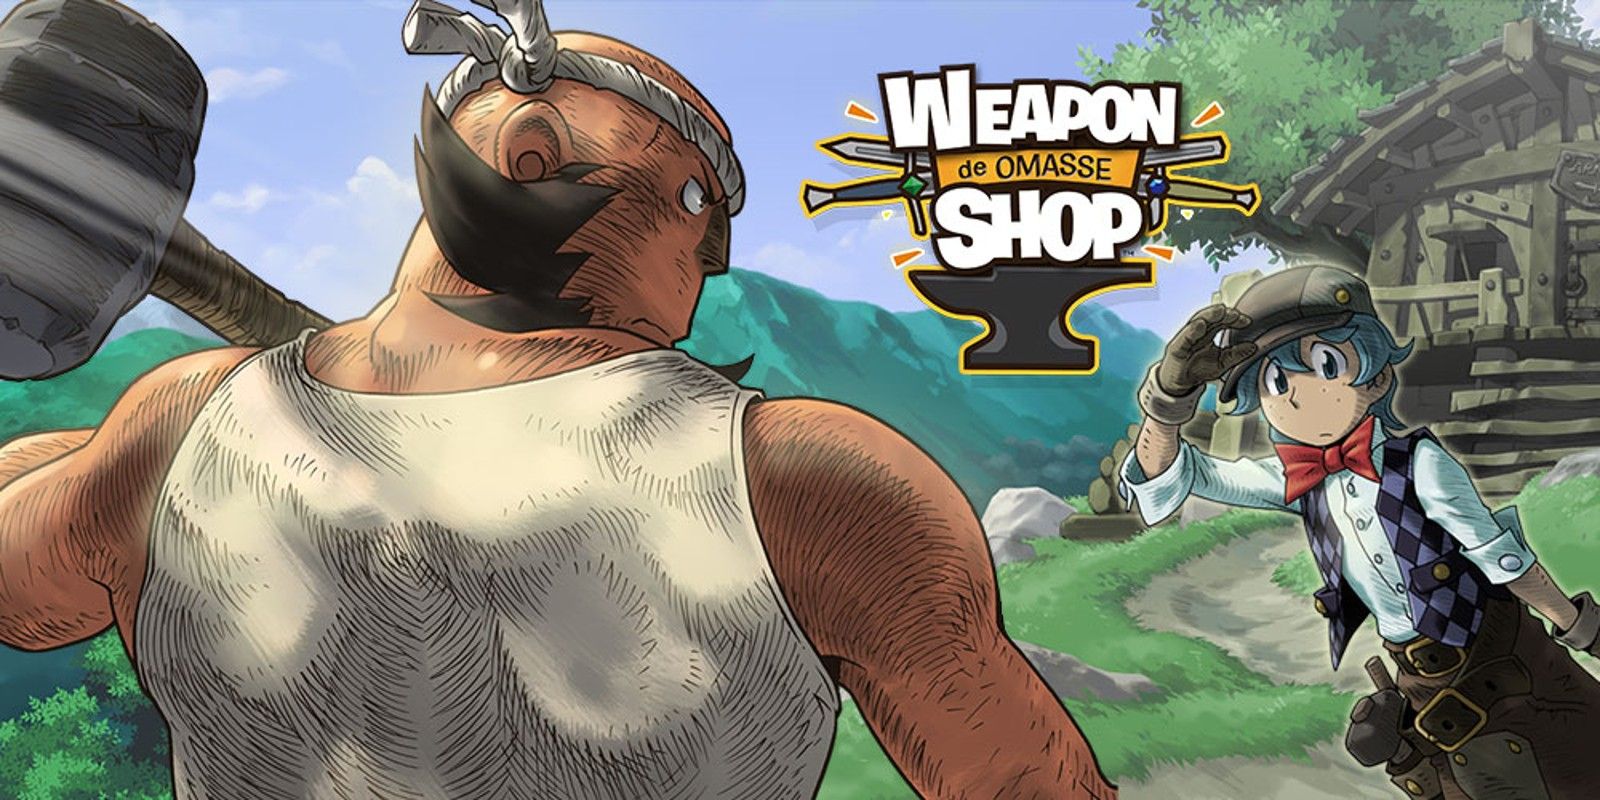 Weapon shop owner and his son in Weapon Shop De Omasse